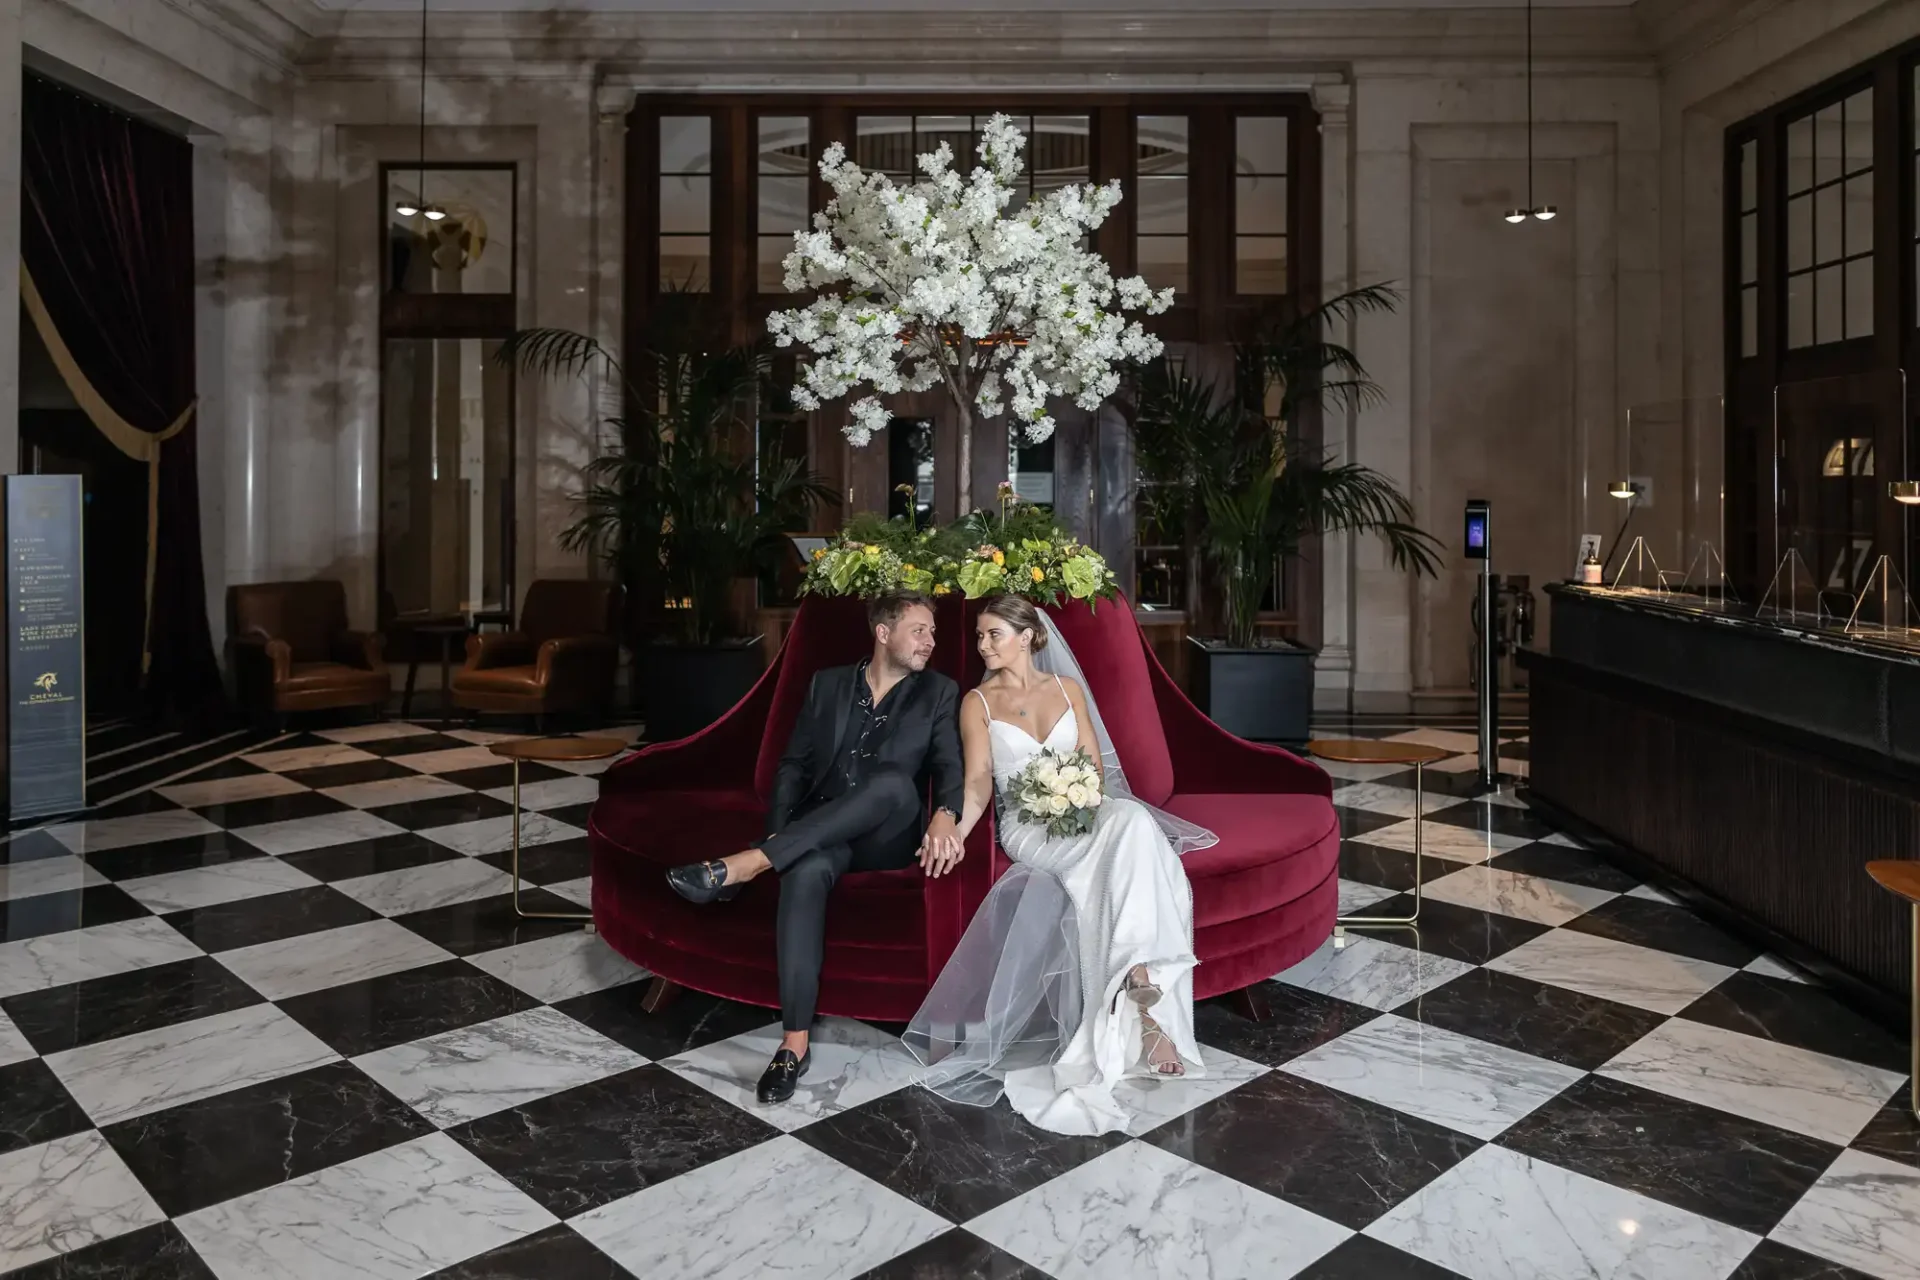 A bride and groom sitting together on a red sofa in a grand lobby with black and white tiled floors and a large floral arrangement.